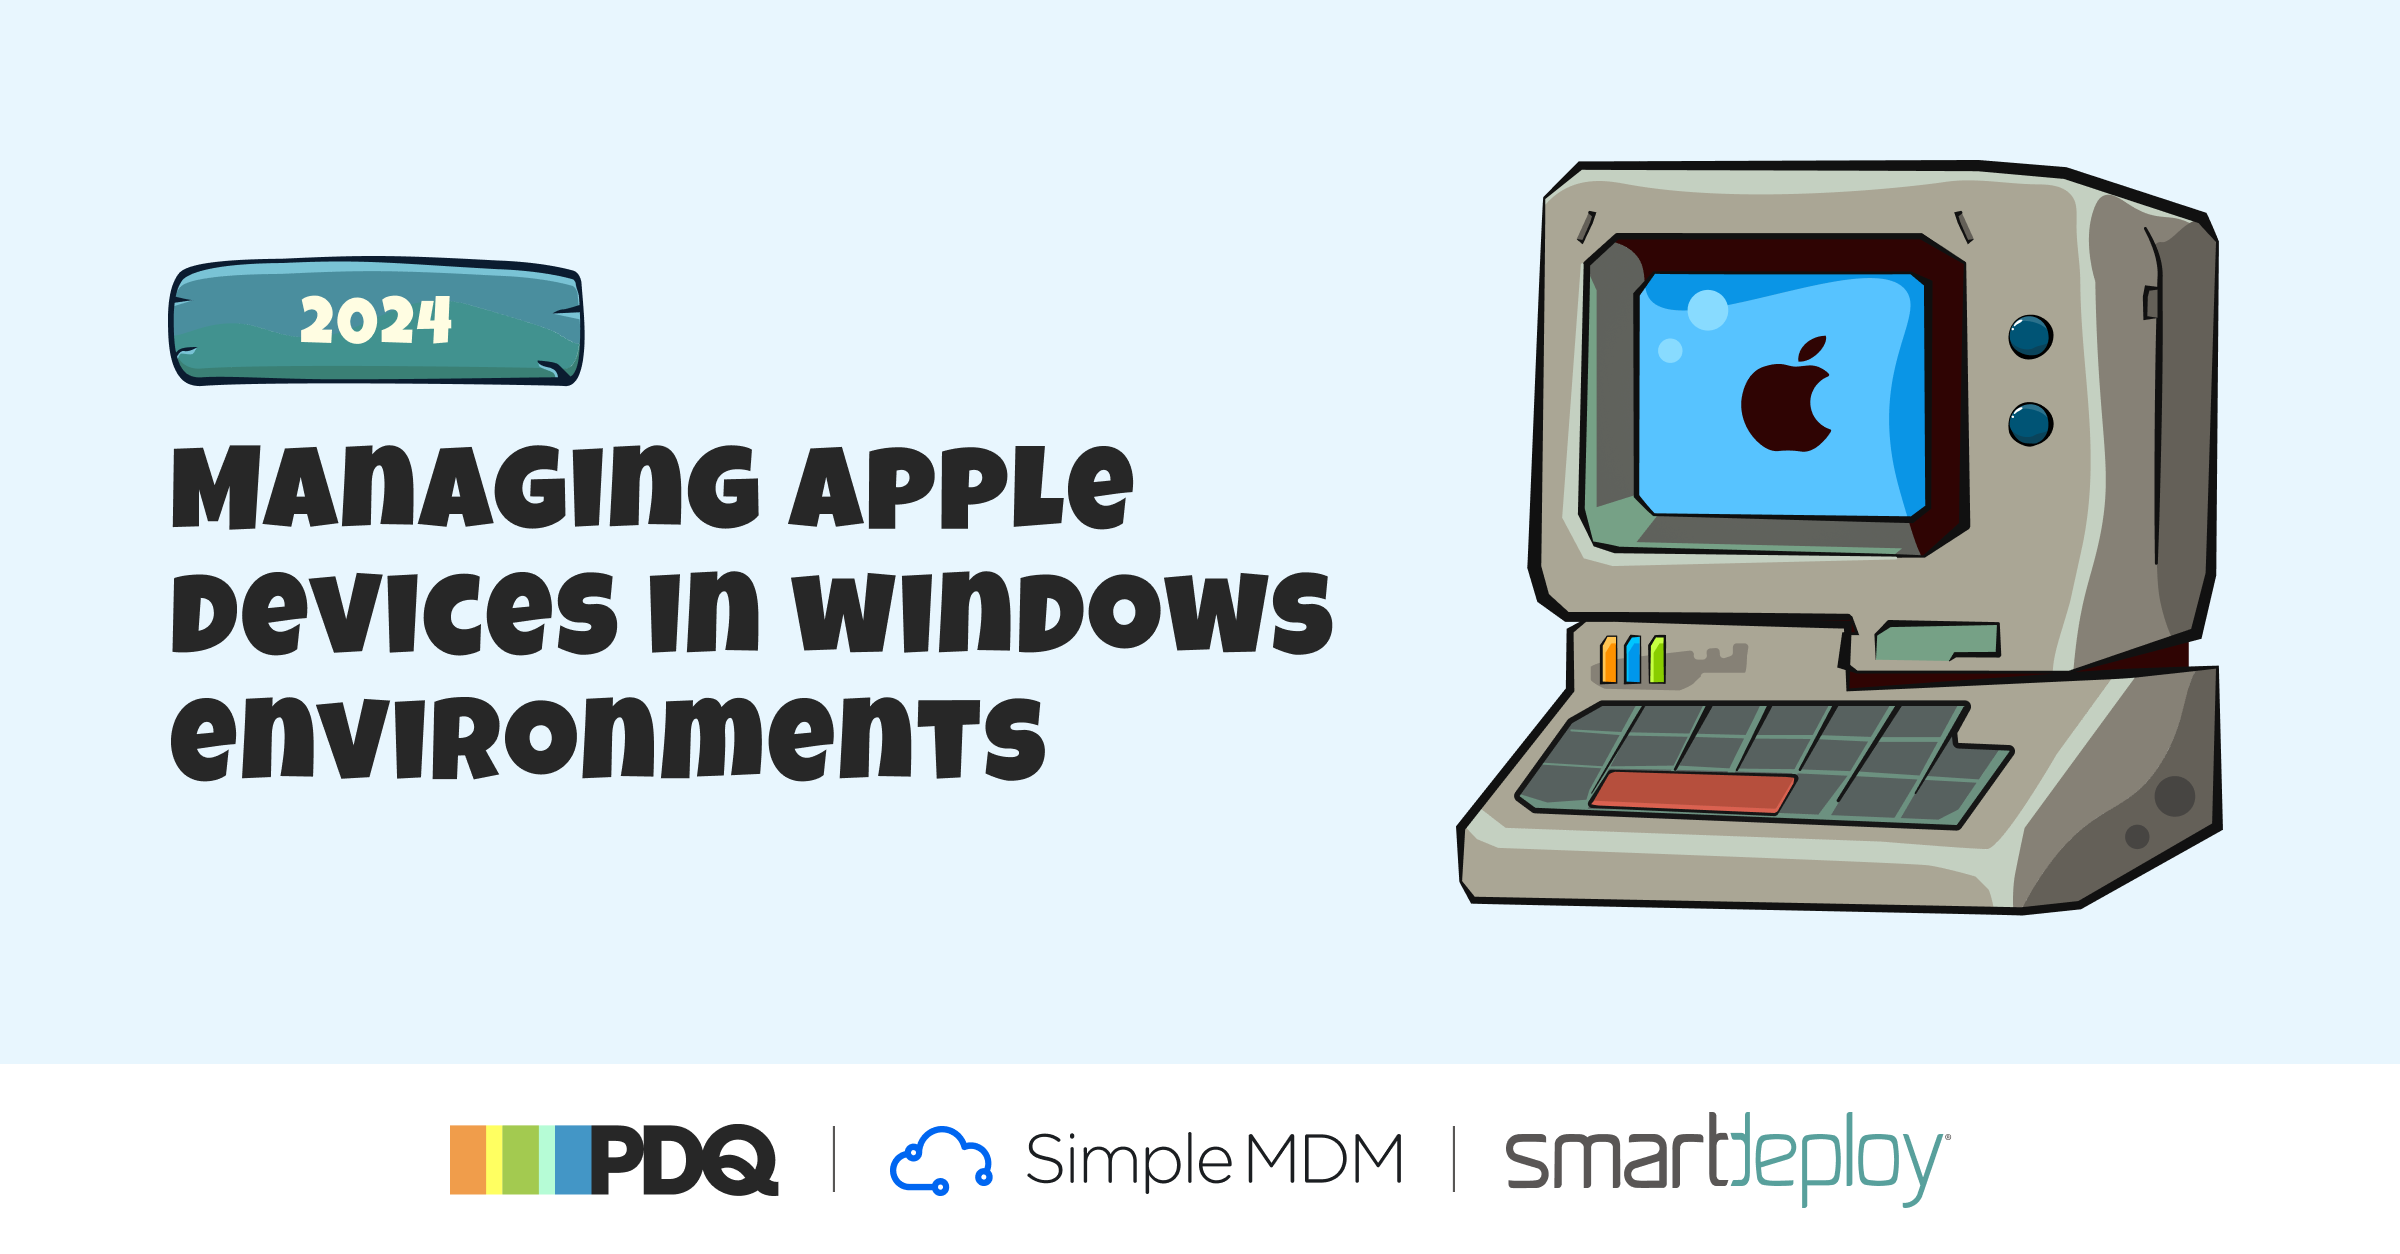 Managing Apple devices in windows environments